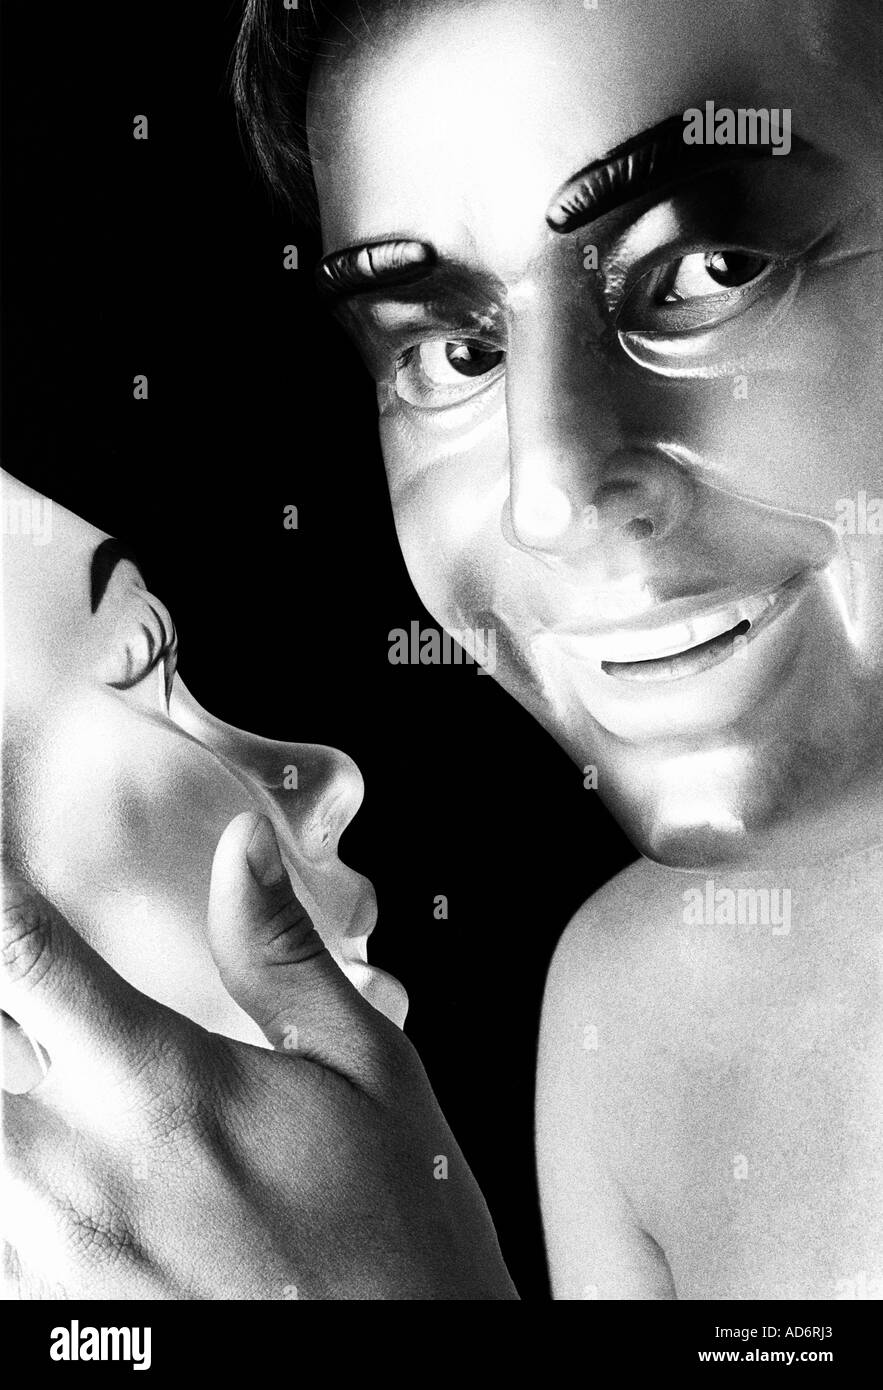 Man wearing mask holding a female mask looking at camera Stock Photo - Alamy